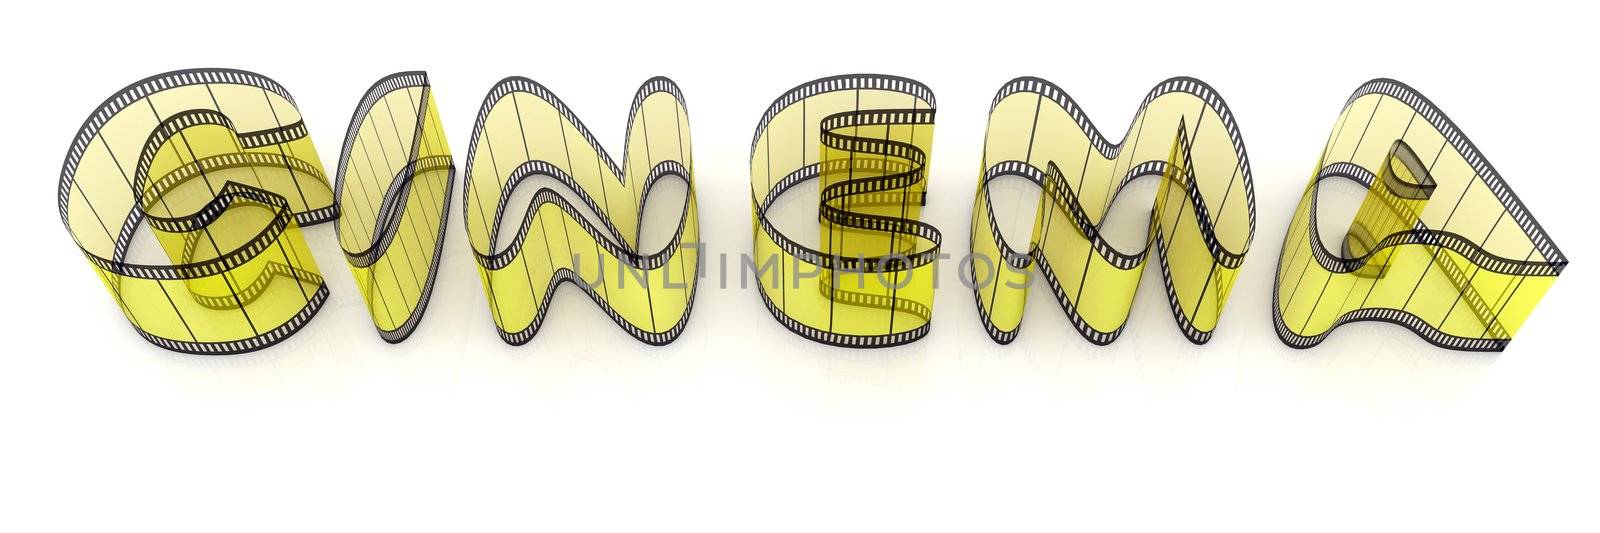 Word "cinema" from film strips over white background